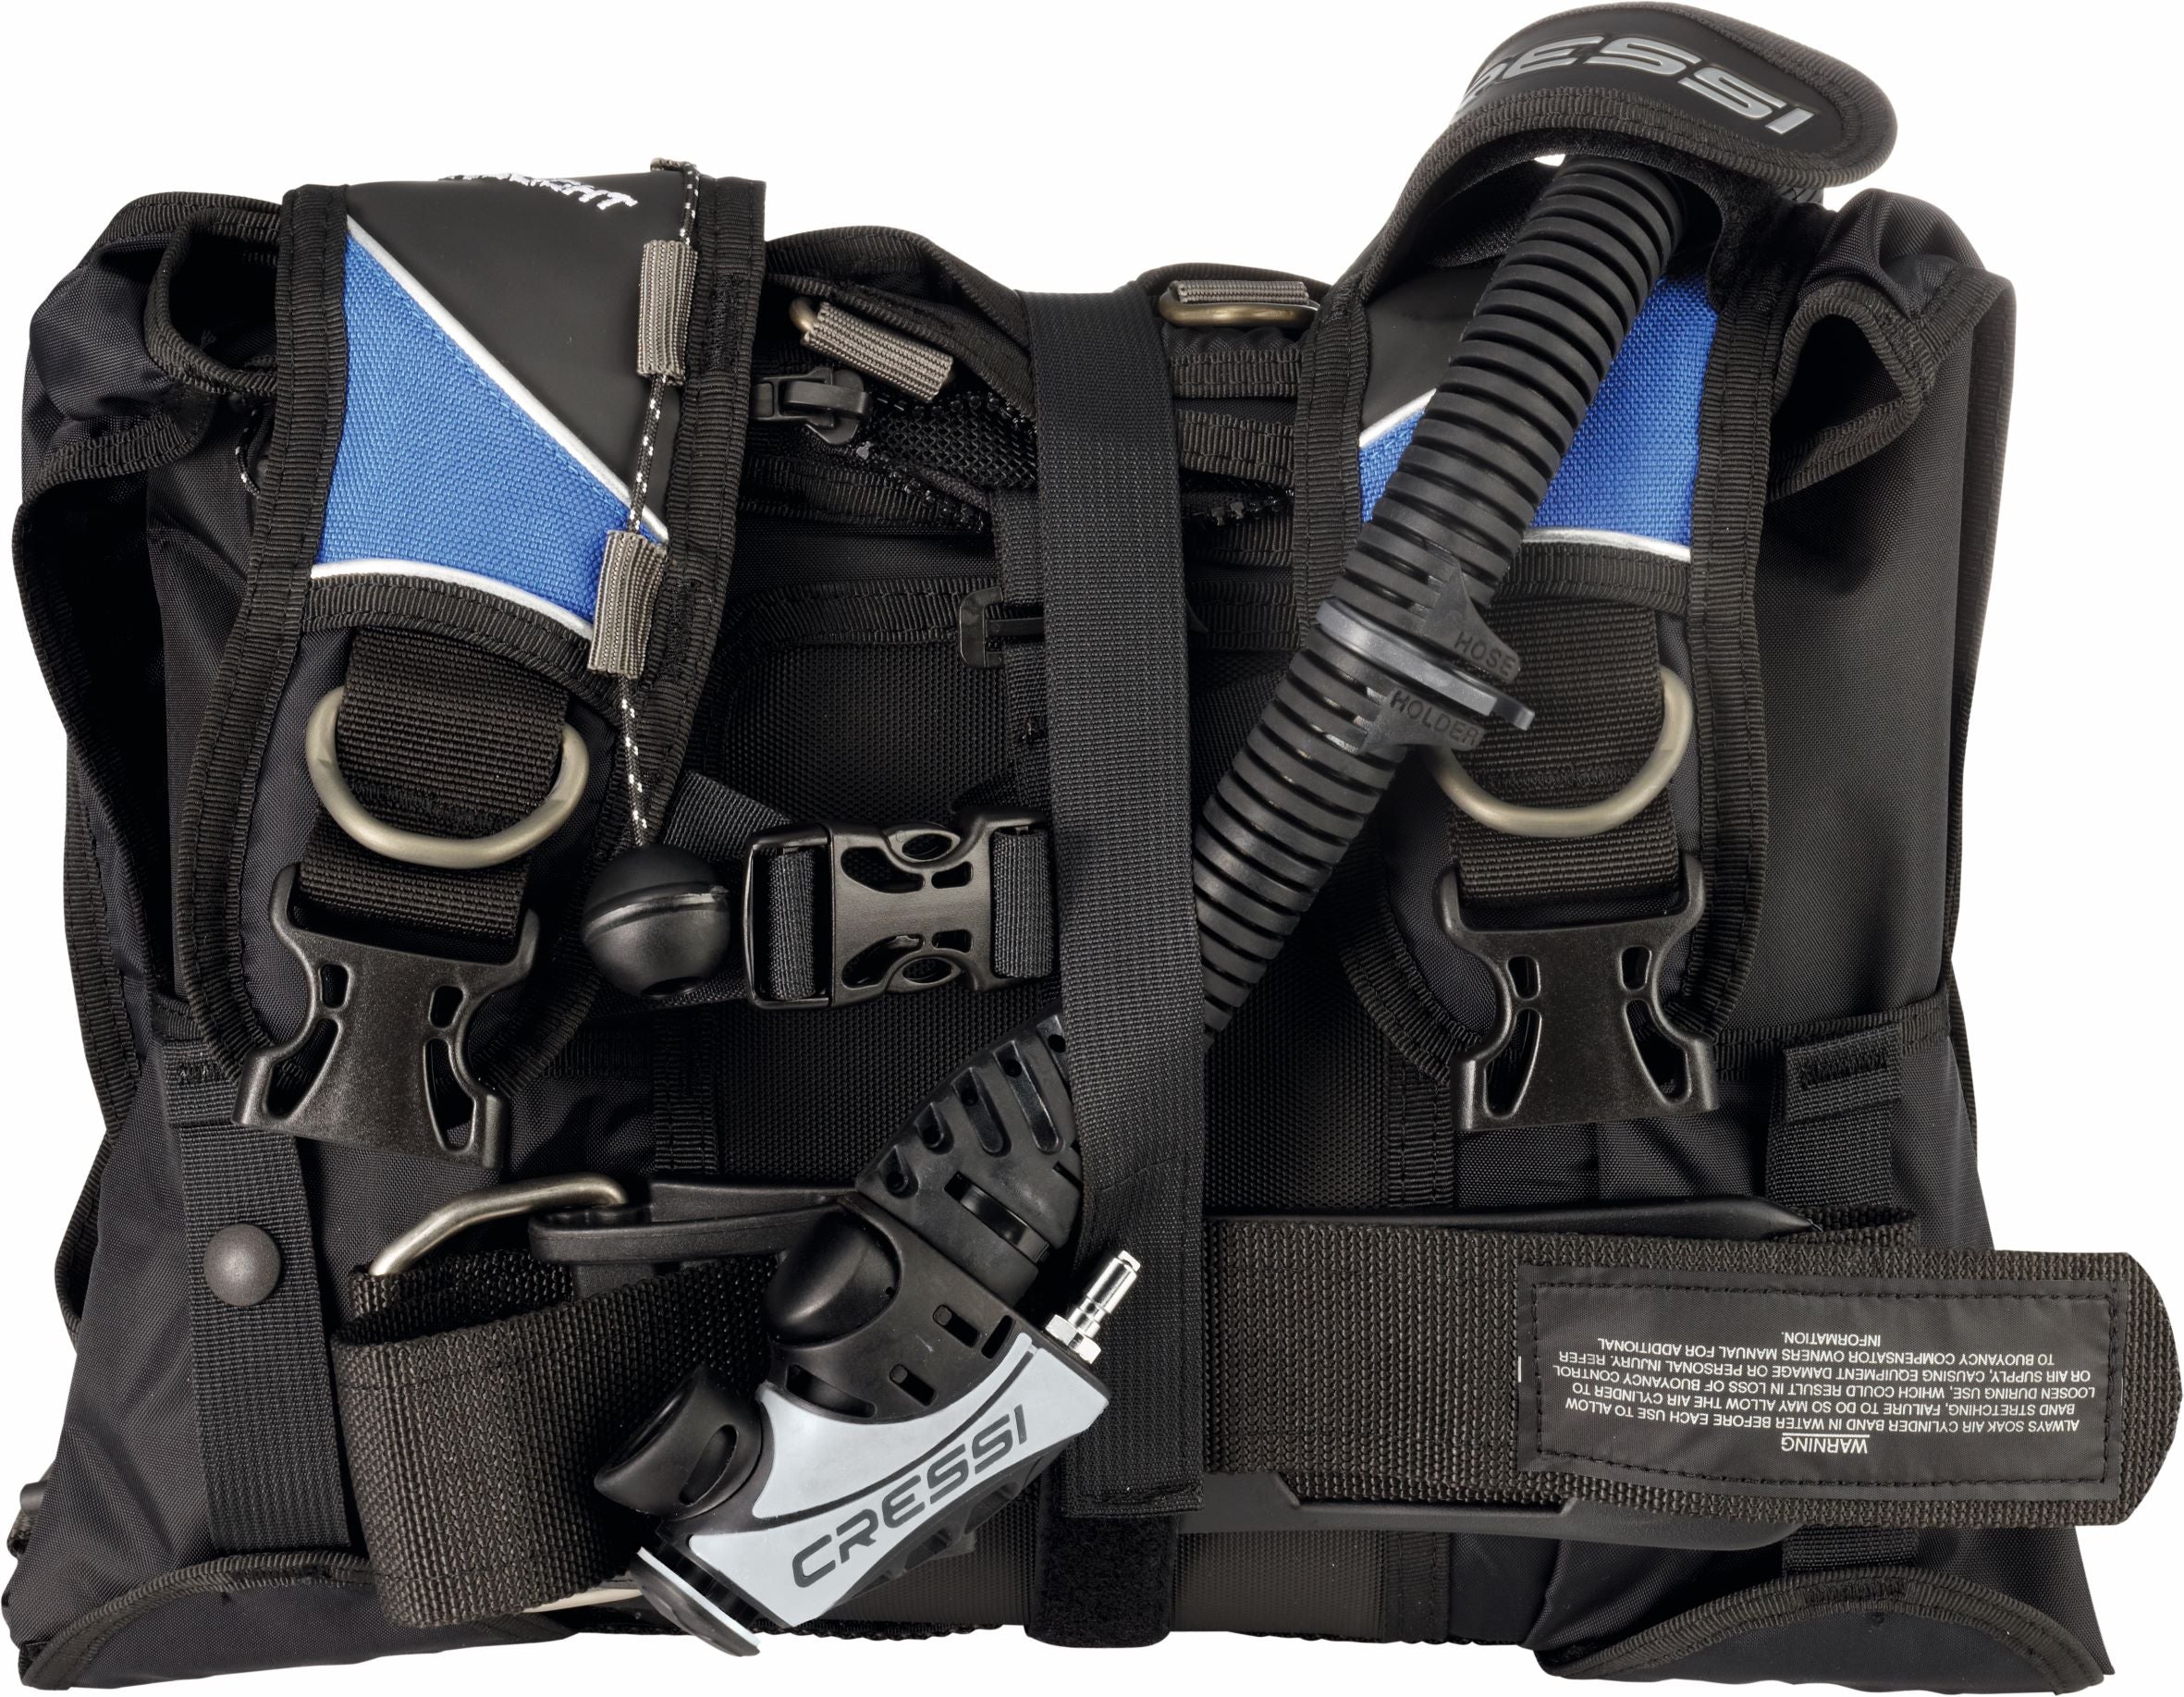 Cressi Travelight BCD | Folded up Convenient for Travel